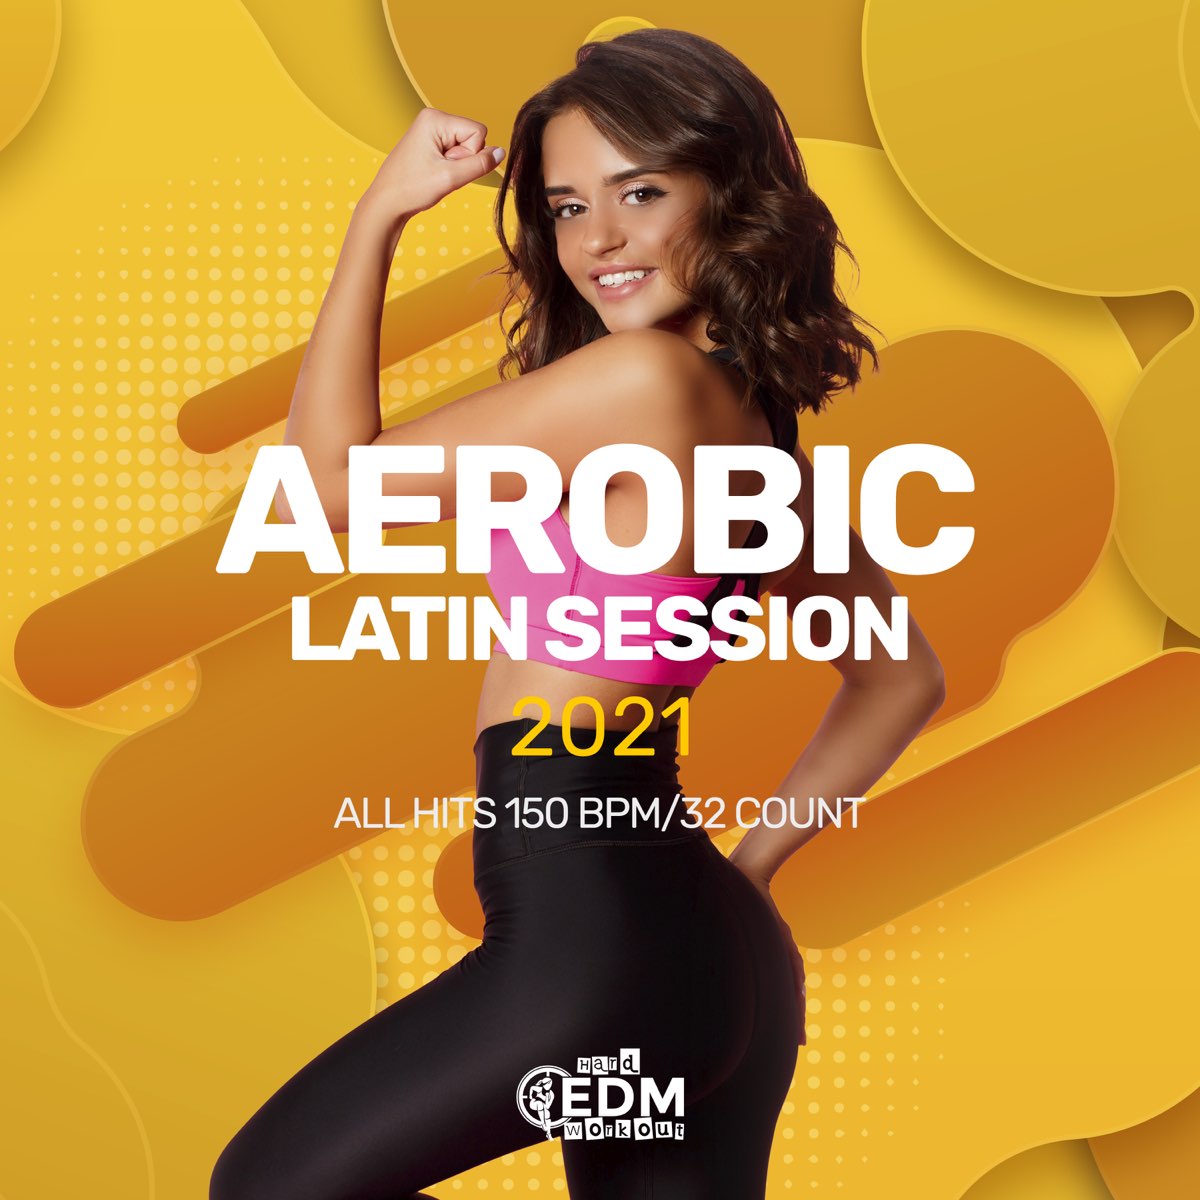 ‎aerobic Latin Session 2021 All Hits 150 Bpm32 Count By Hard Edm Workout On Apple Music 5224